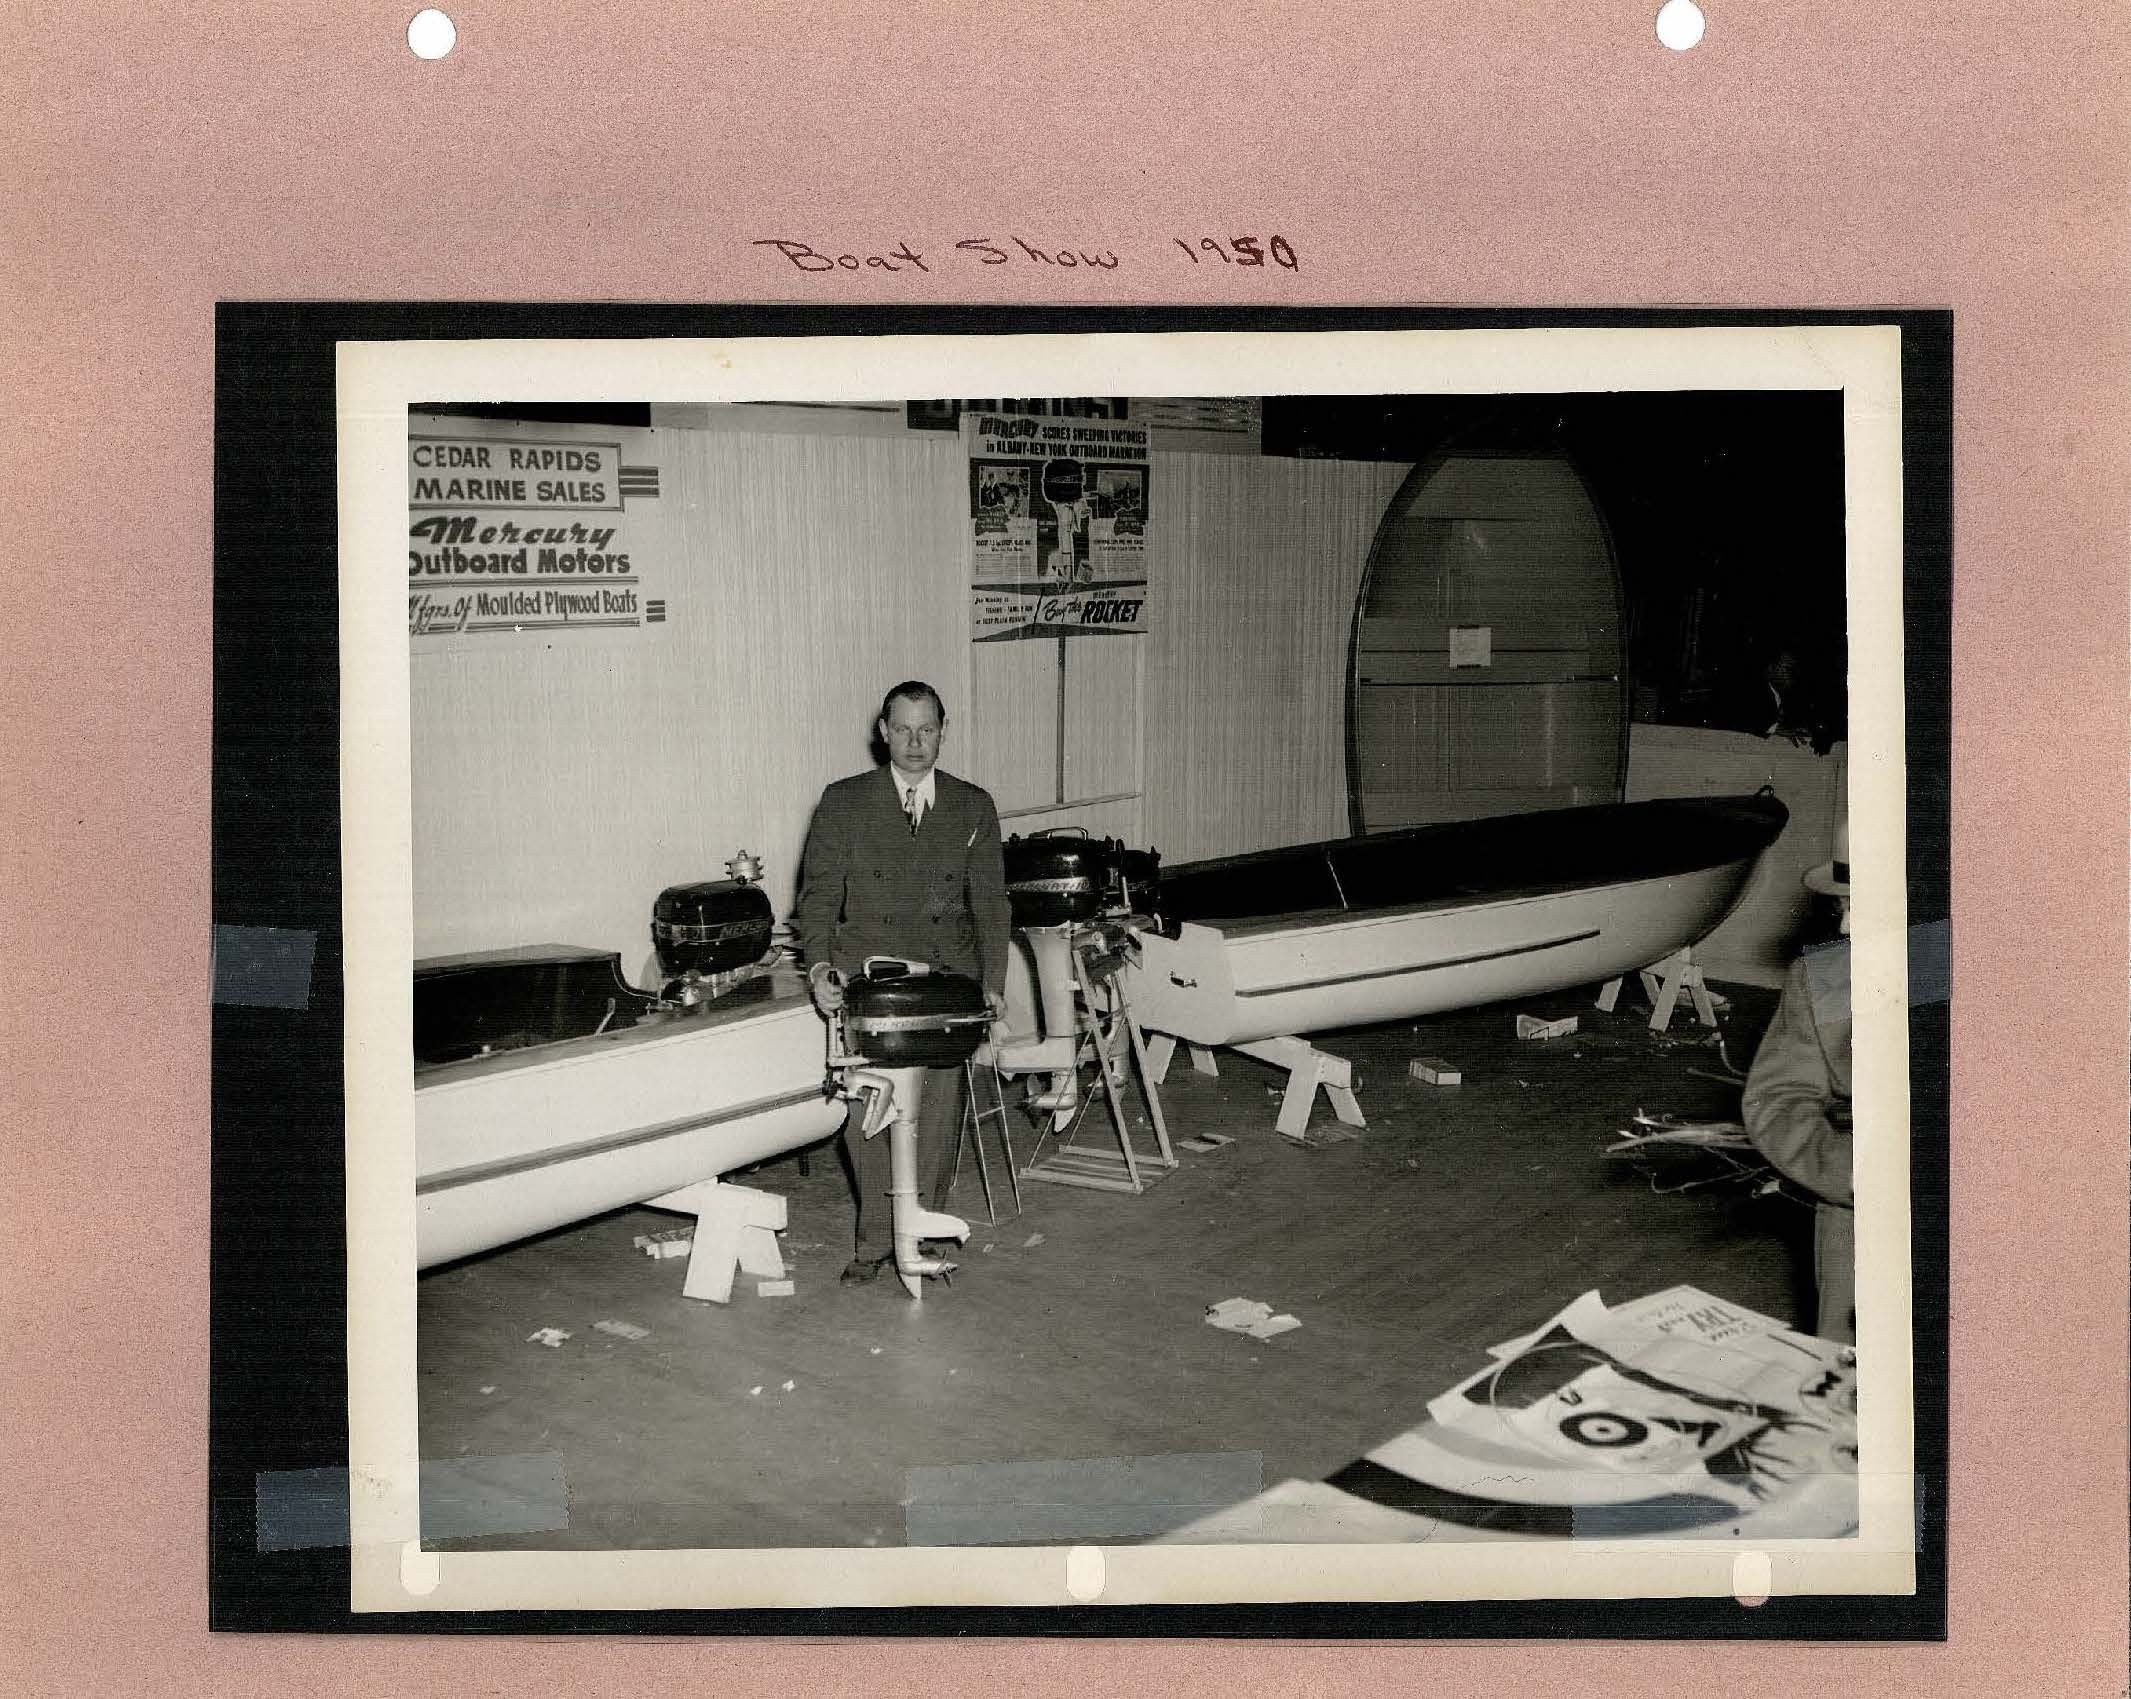 Photo taken at Boat show 1950 of man with outboard motor